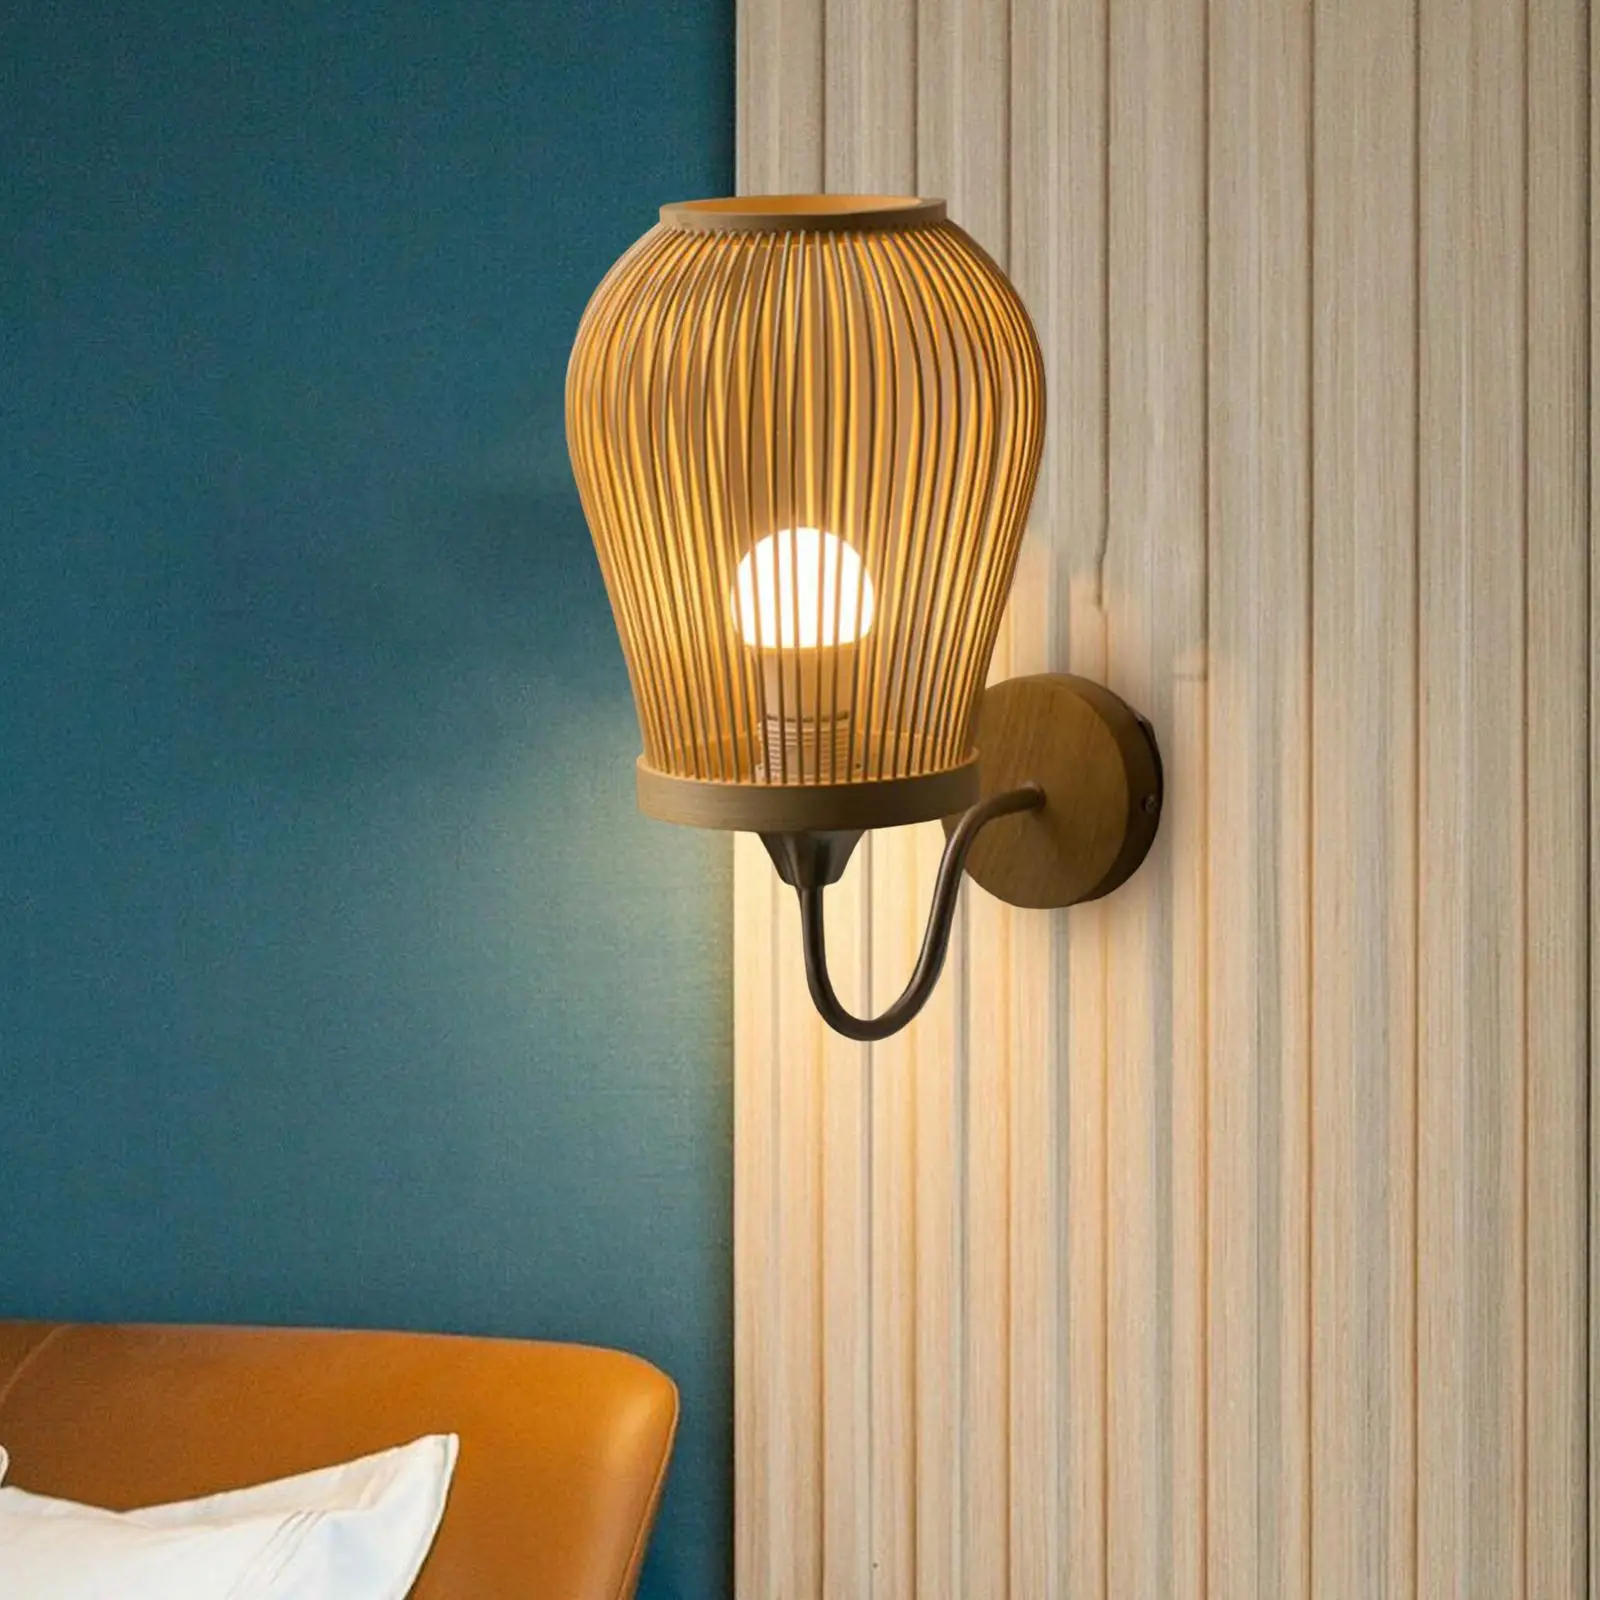 Bamboo Wall Mounted Sconce Lamp Light Vintage Style Lighting E27 Base Decorative Farmhouse for Hotel Study Bedroom Decor